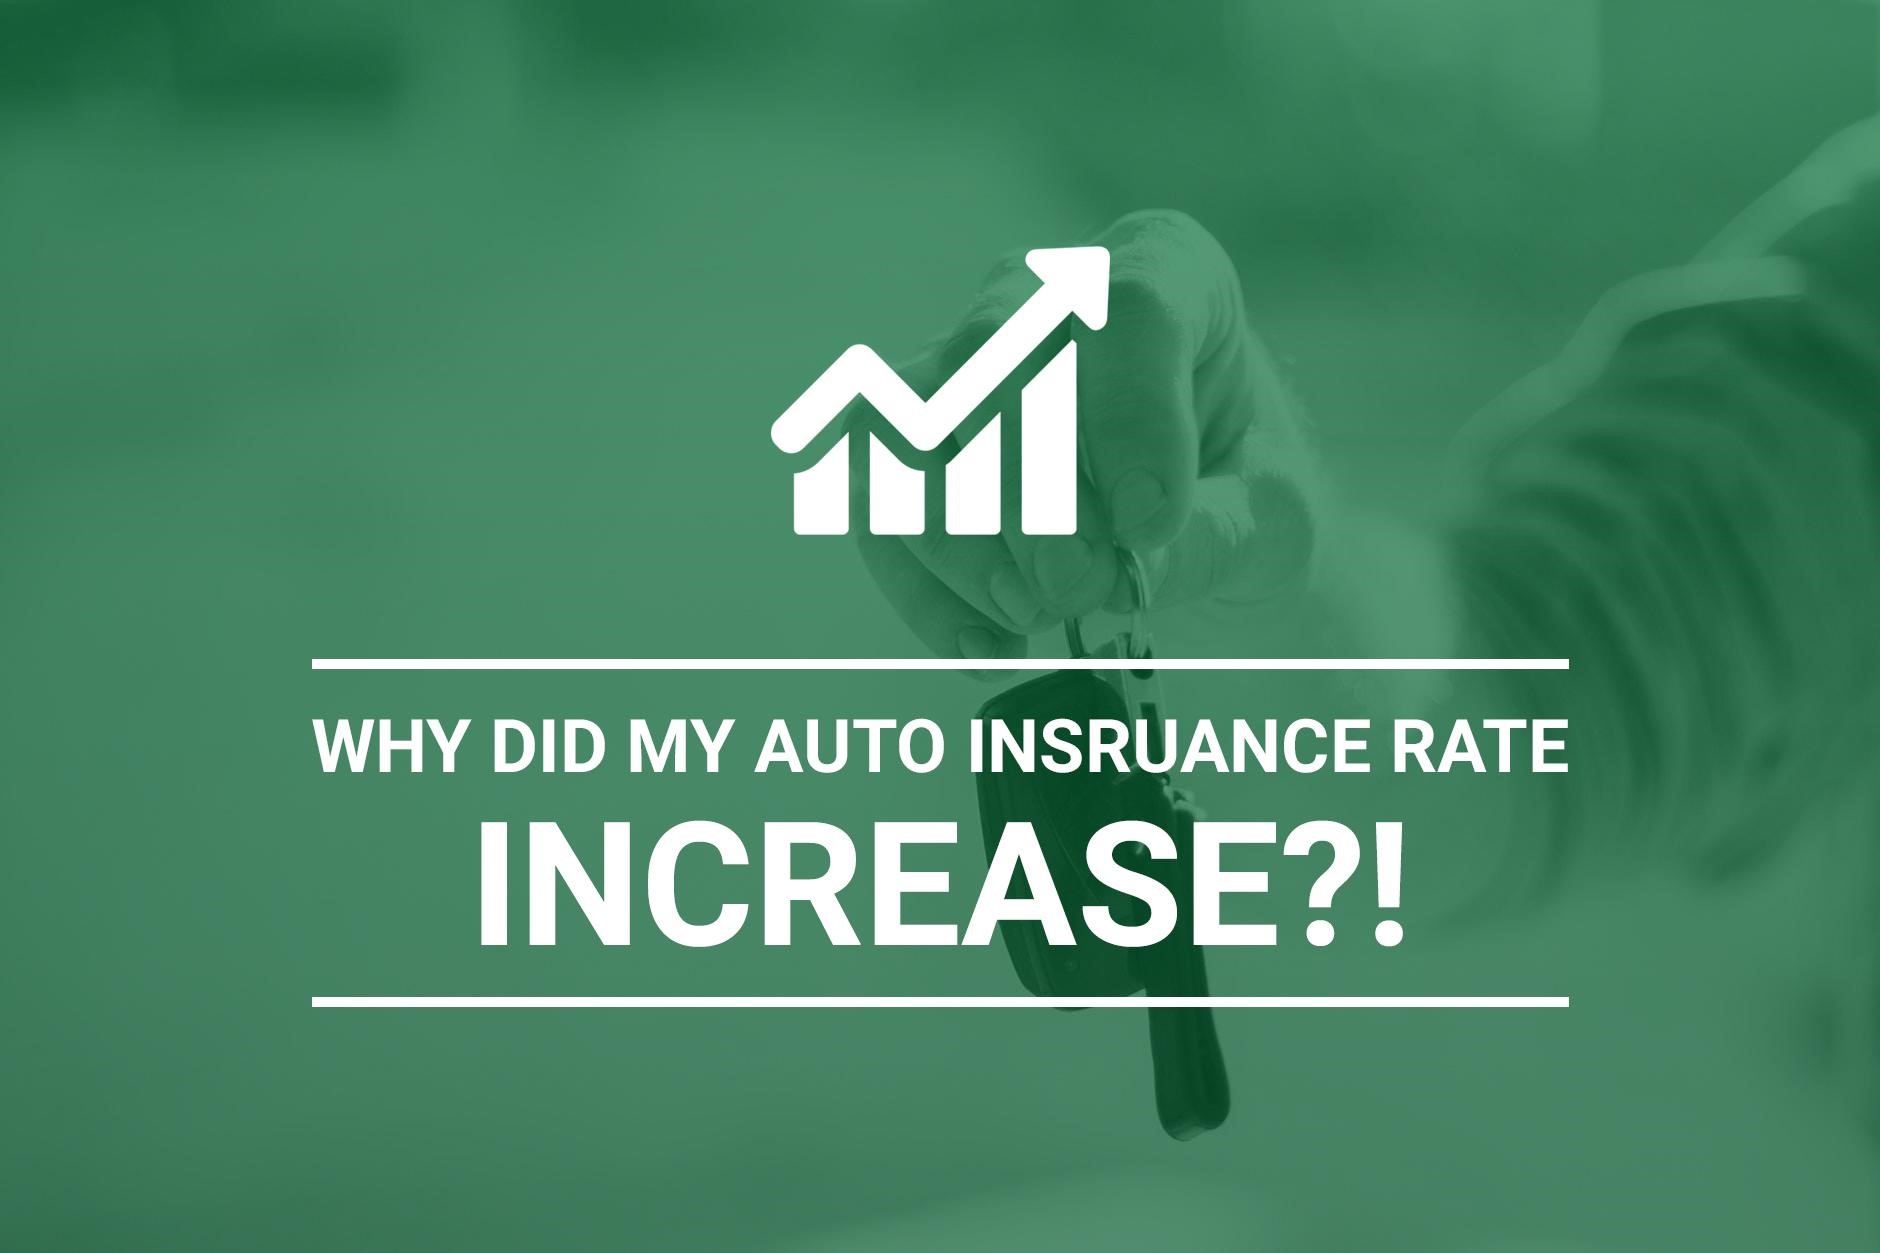 Reasons For Auto Insurance Rate Increases Why Did My Rate Increase?